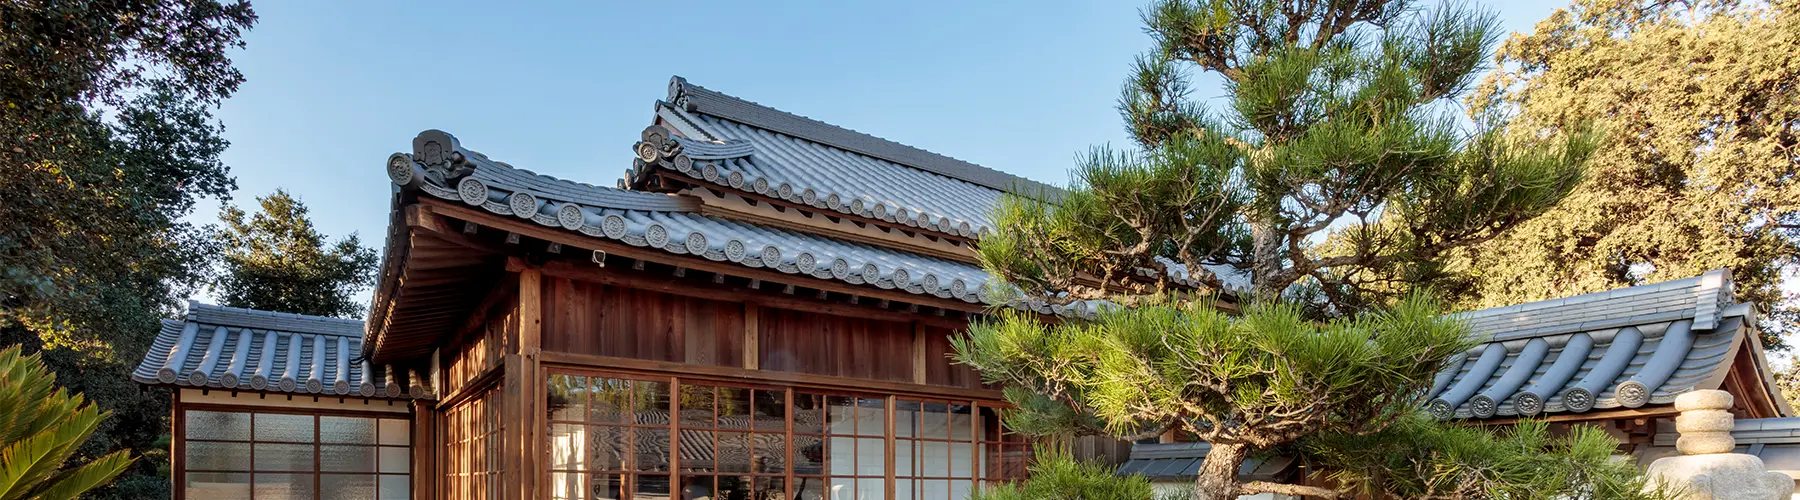 A traditional Japanese house in a garden with trees.